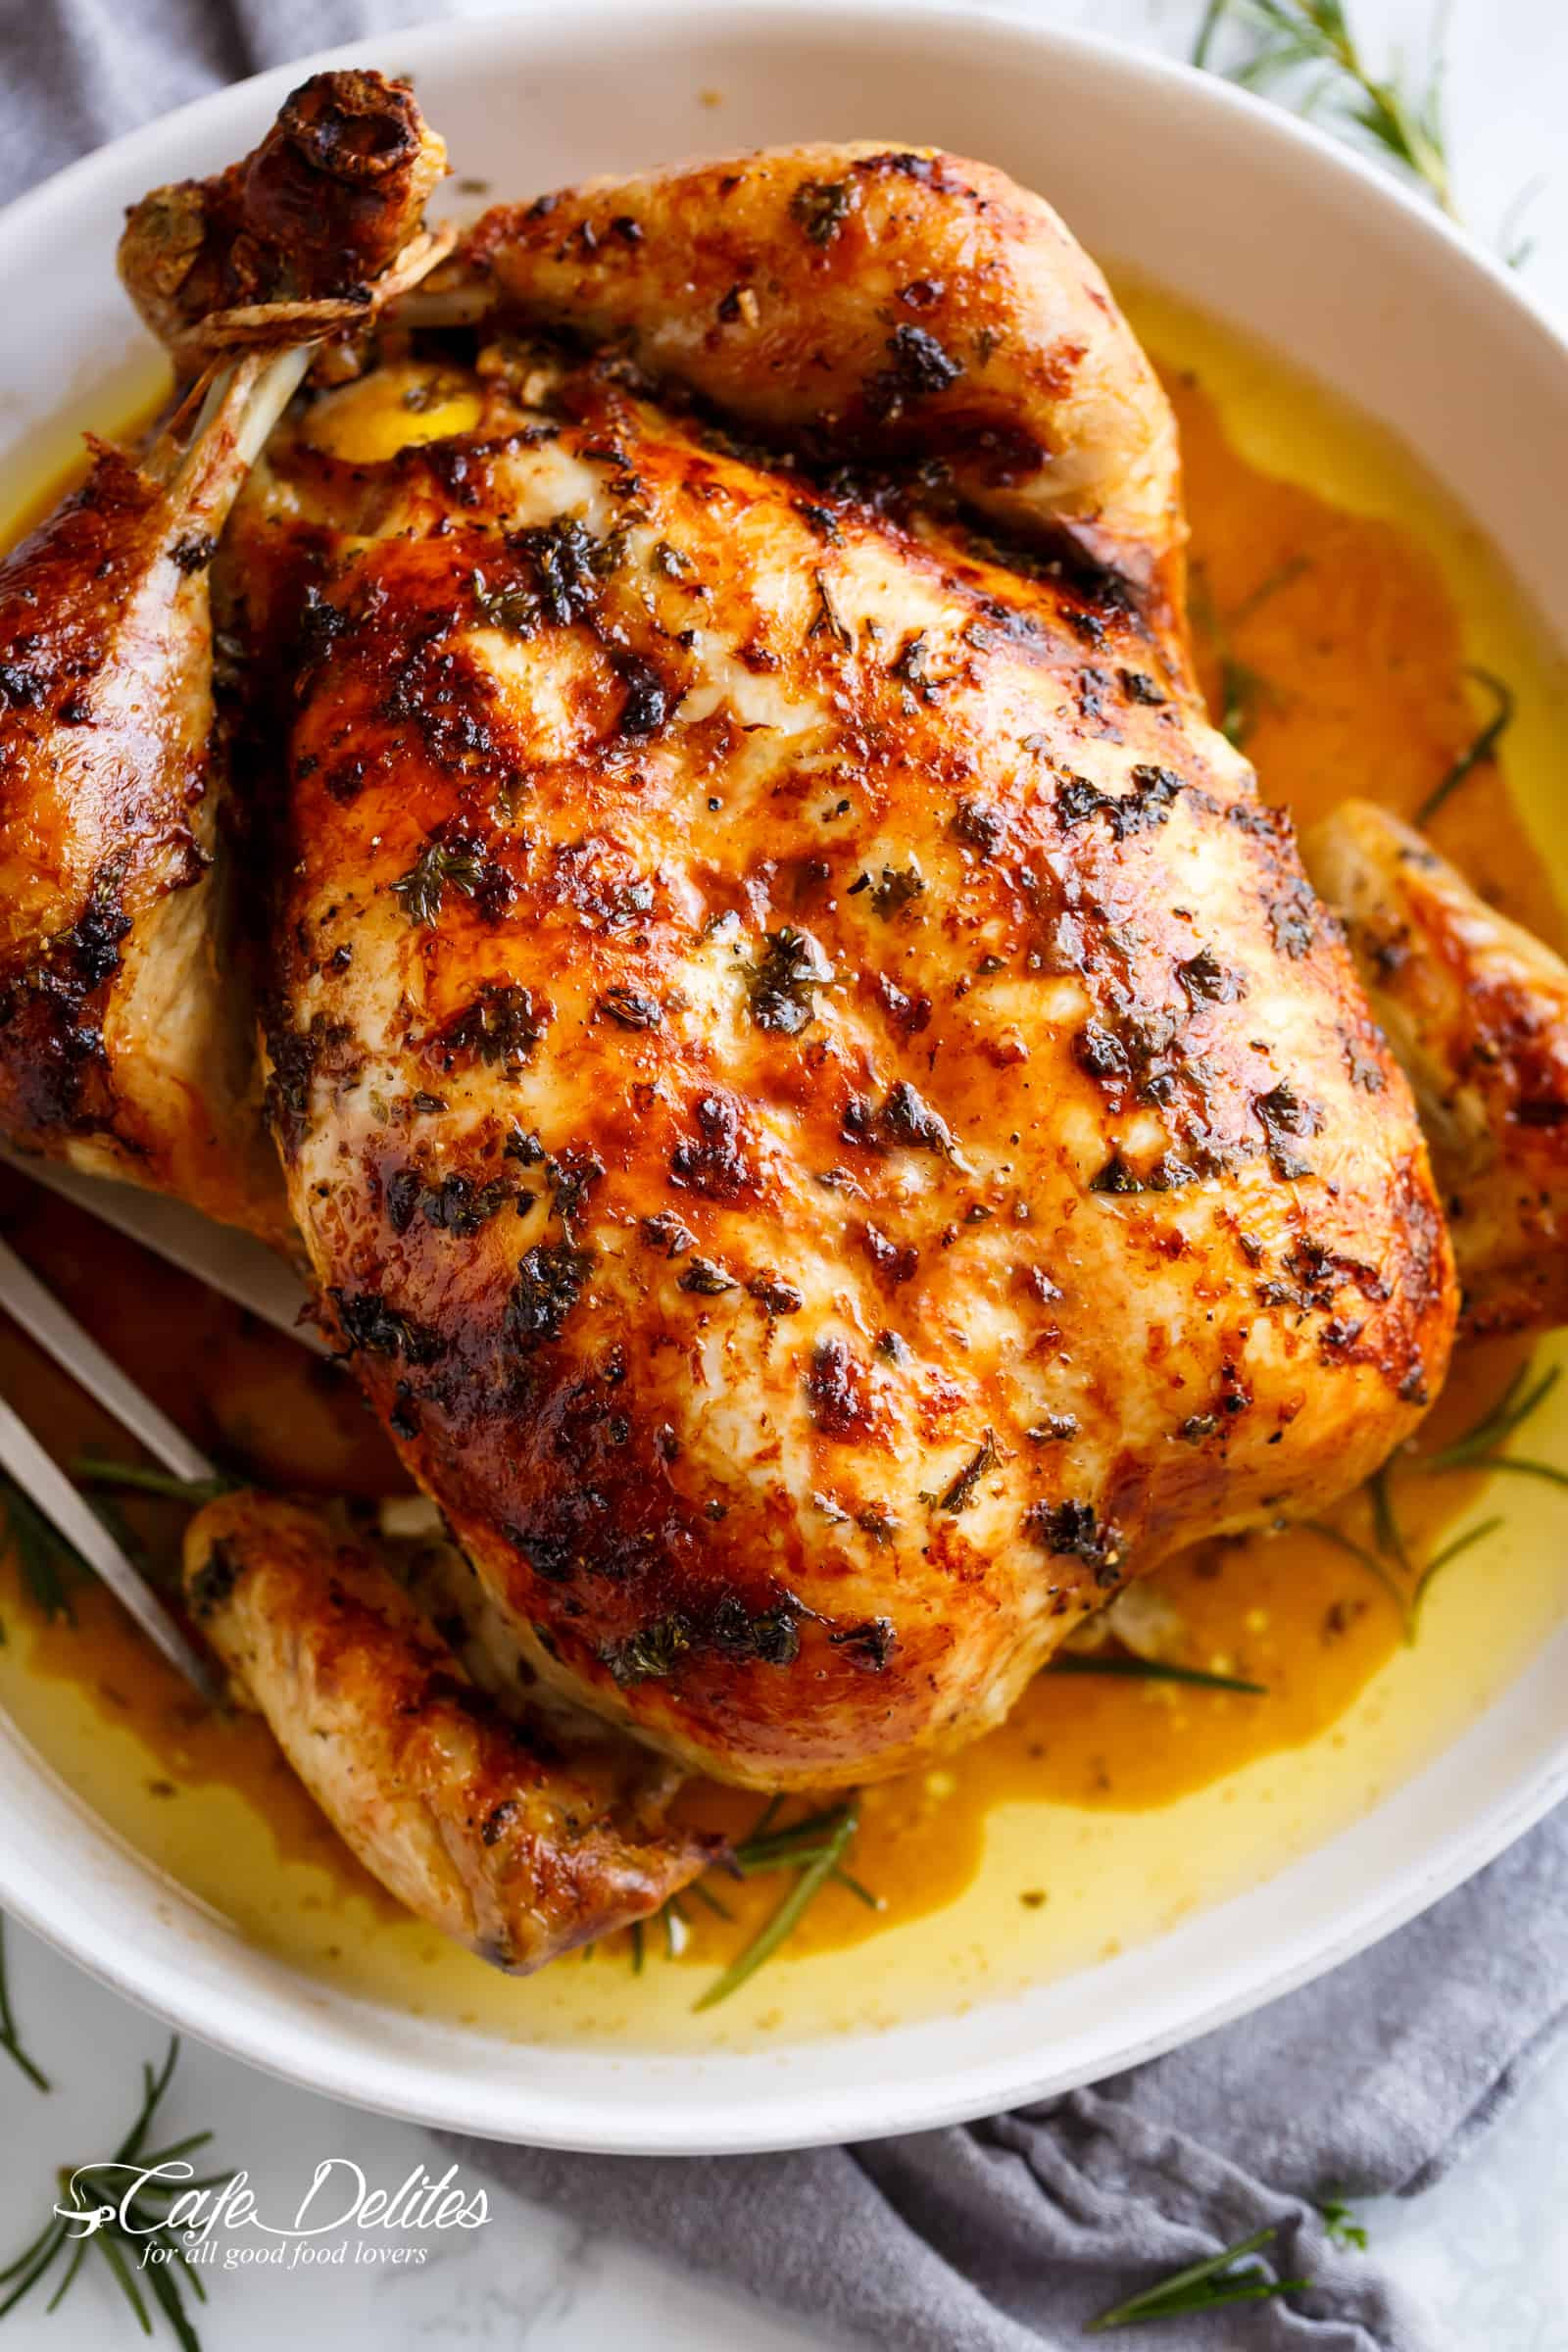 Cook Whole Chicken
 23 Different Ways To Cook Whole Chicken With